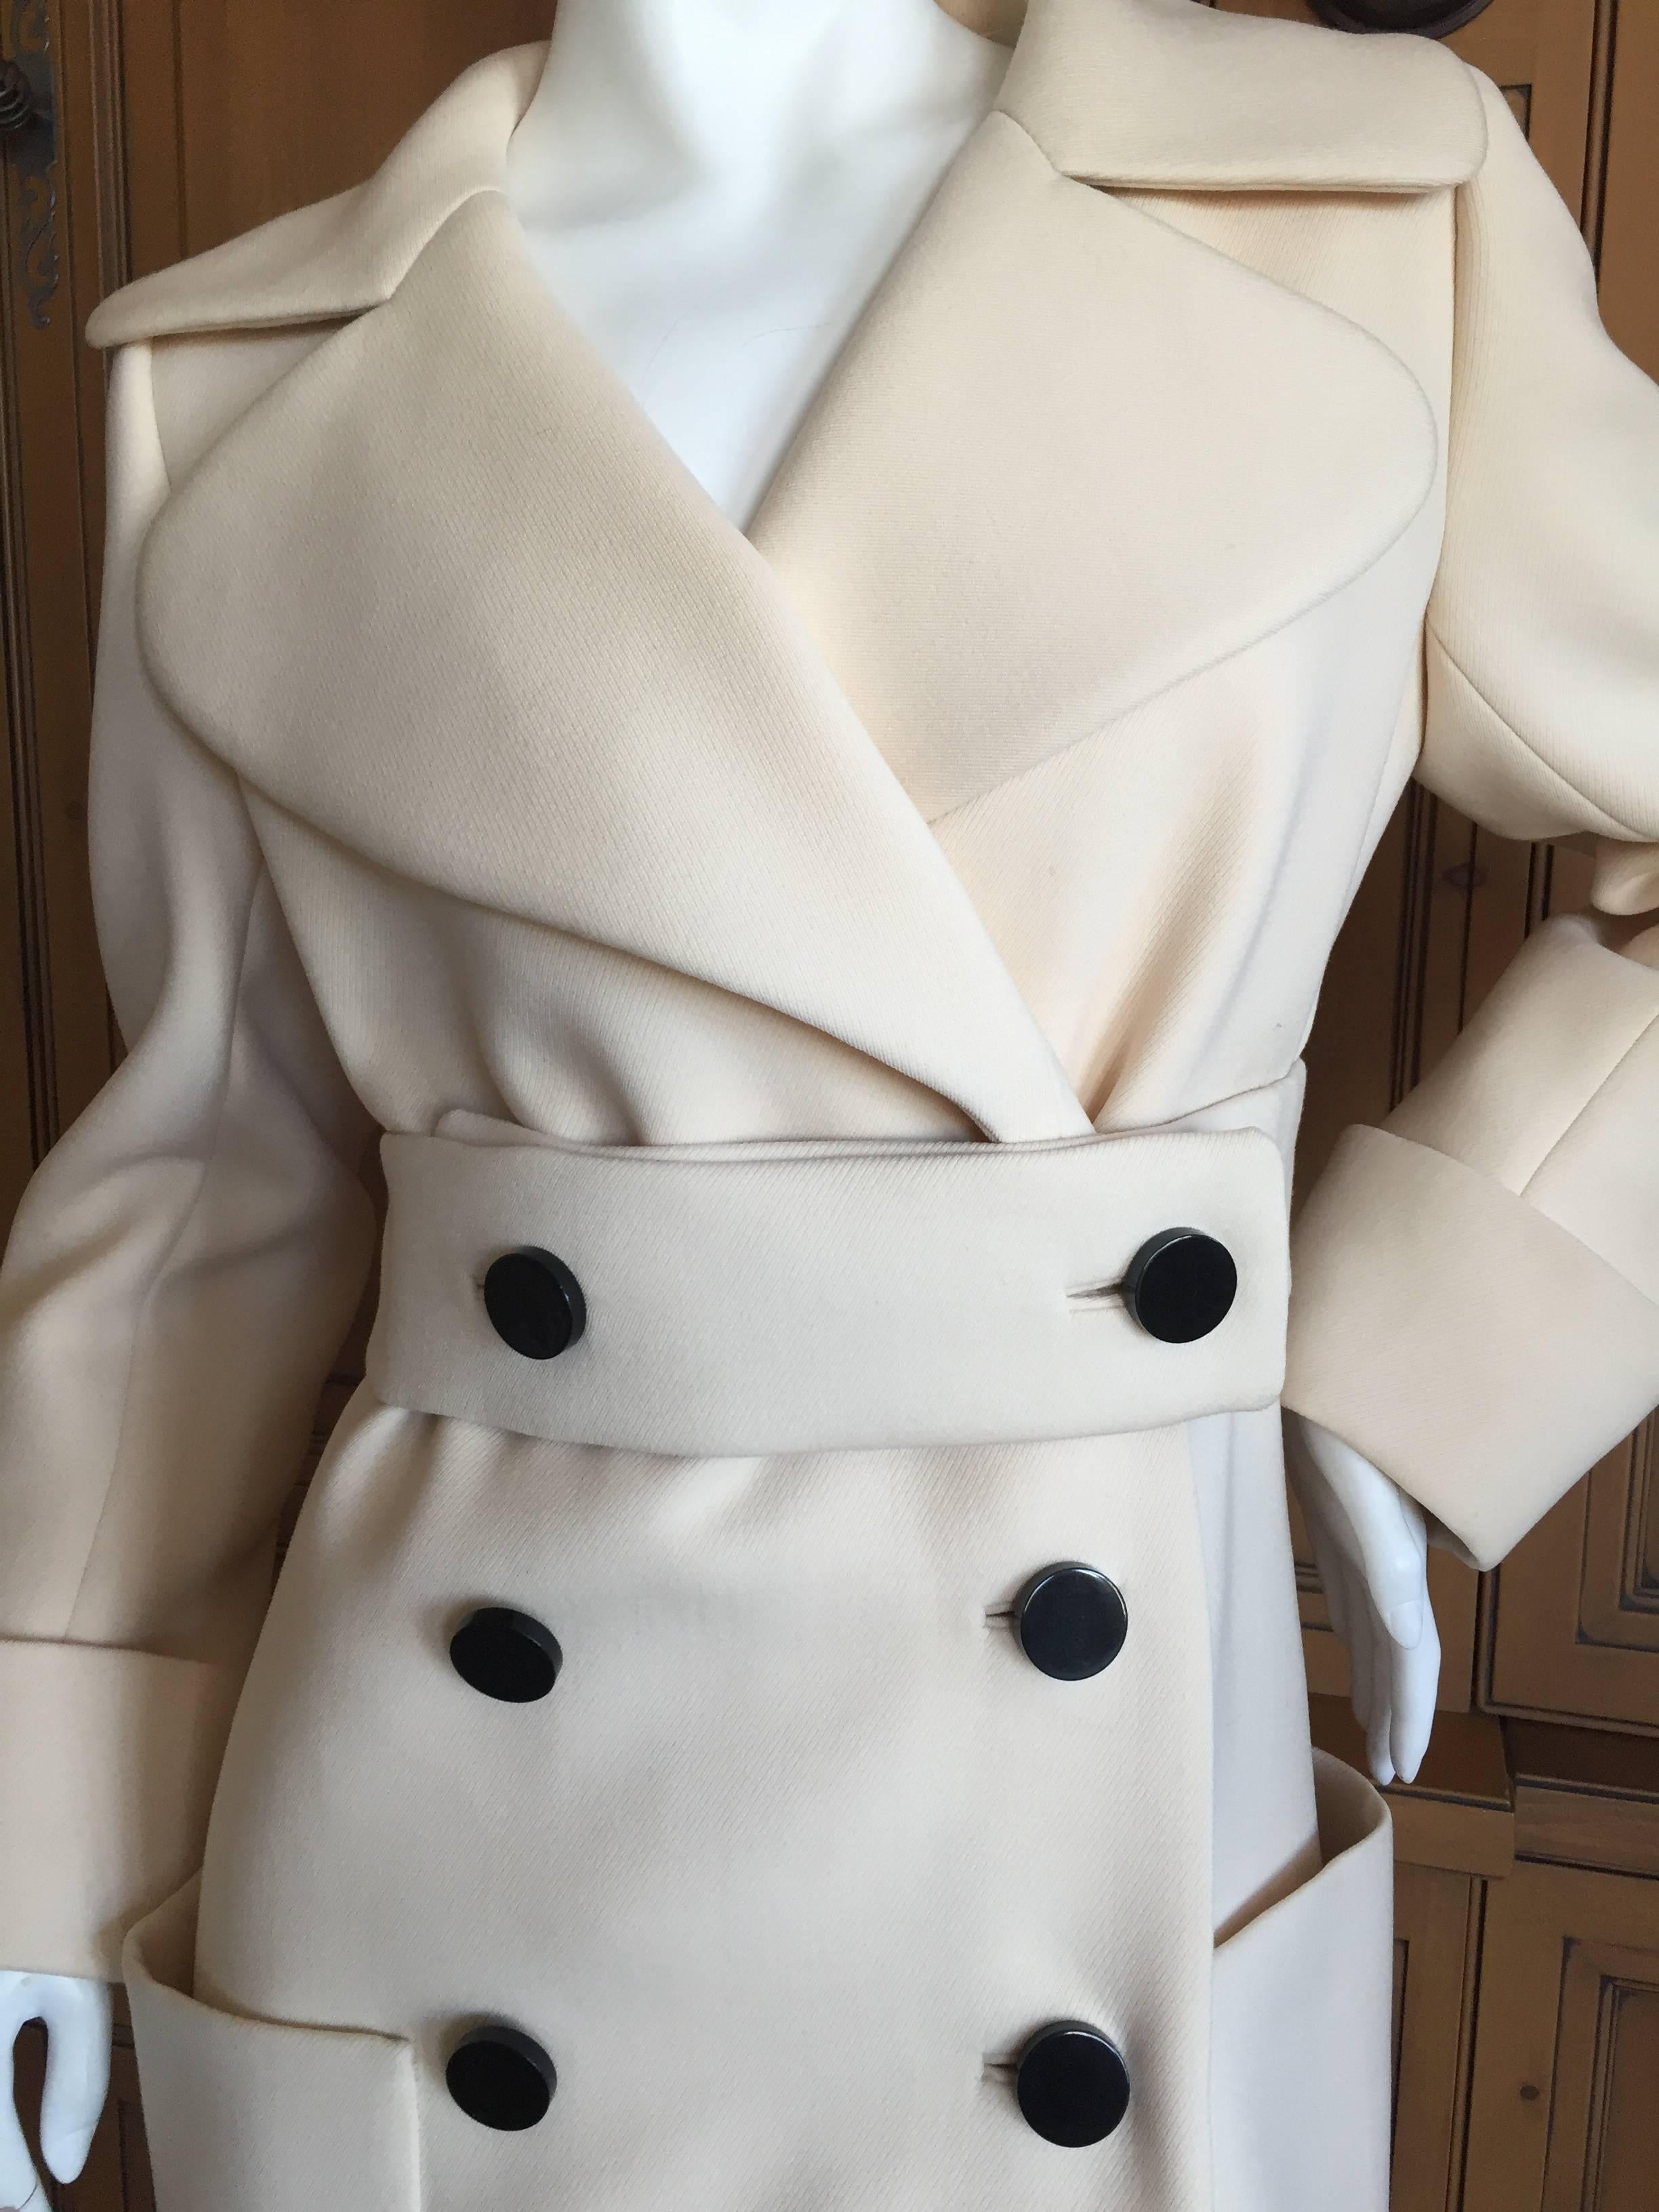 Norman Norell 1960 Ivory Coat with Wide Belt.
Wonderful Norell, with exaggerated collar and wide belt.
Lined in silk taffeta, all hand finished.
Size 10
Bust 40